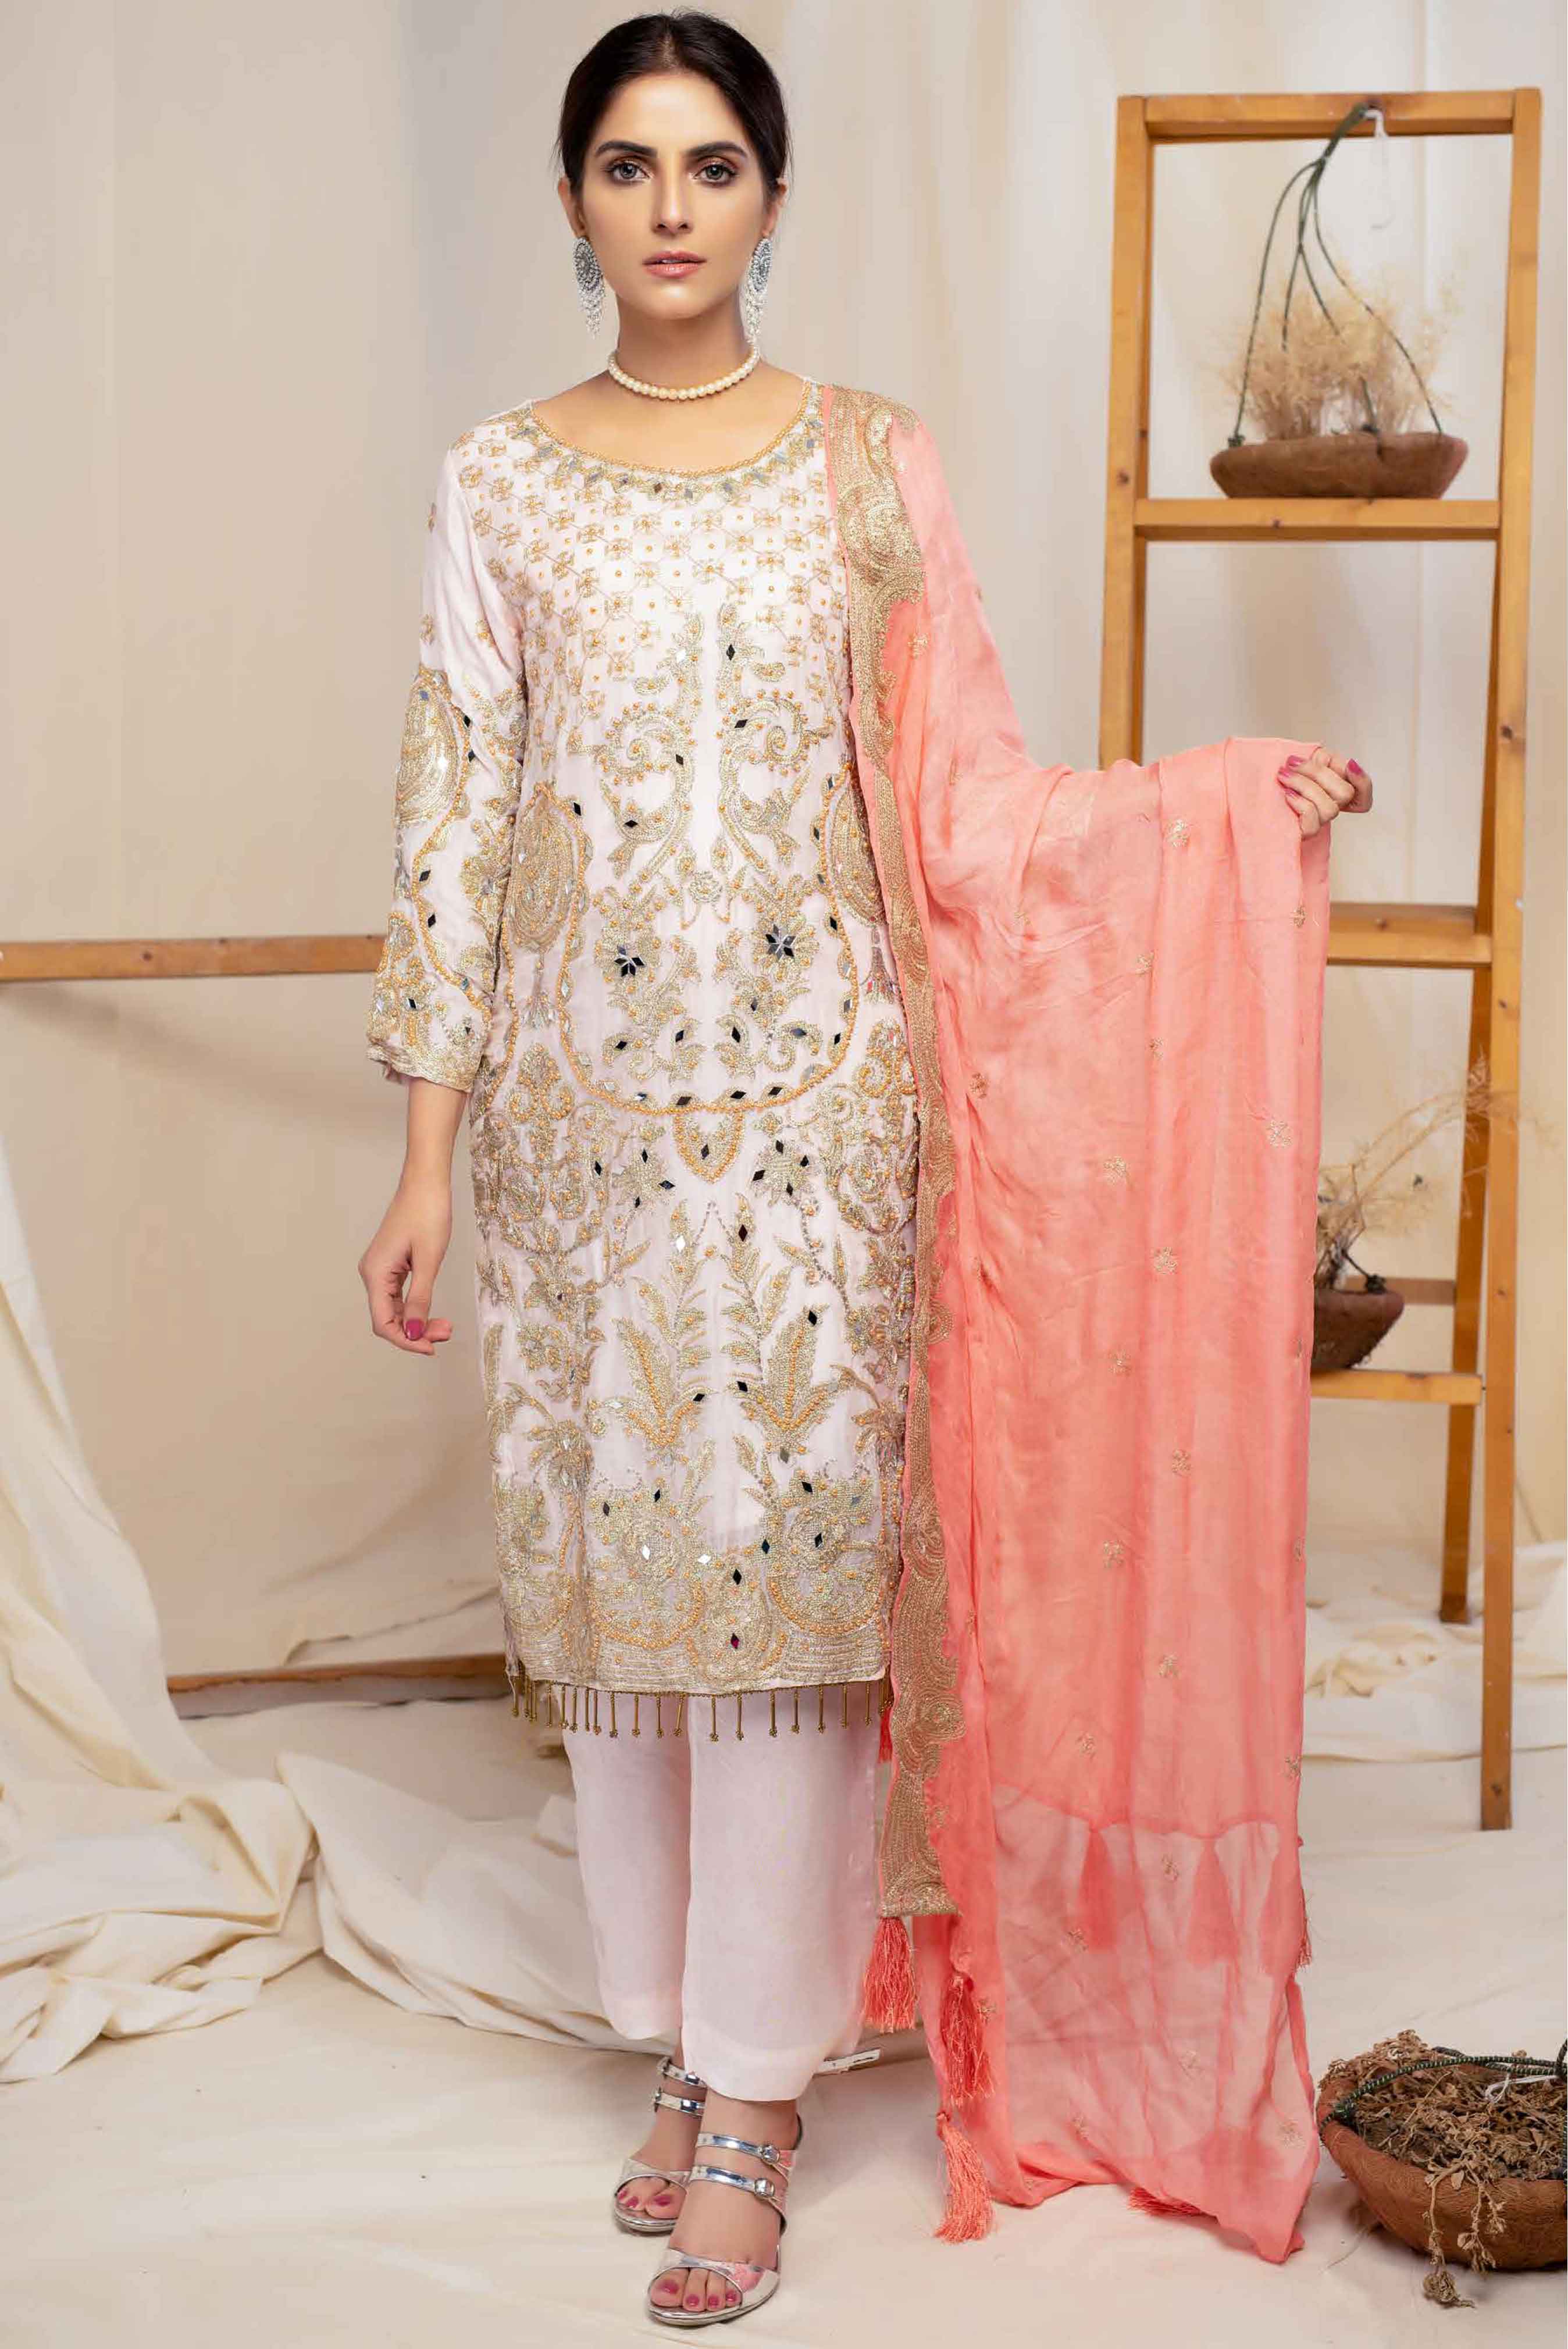 Simrans Semi Formal Ladies Pink Outfit With Contrasting Dupatta